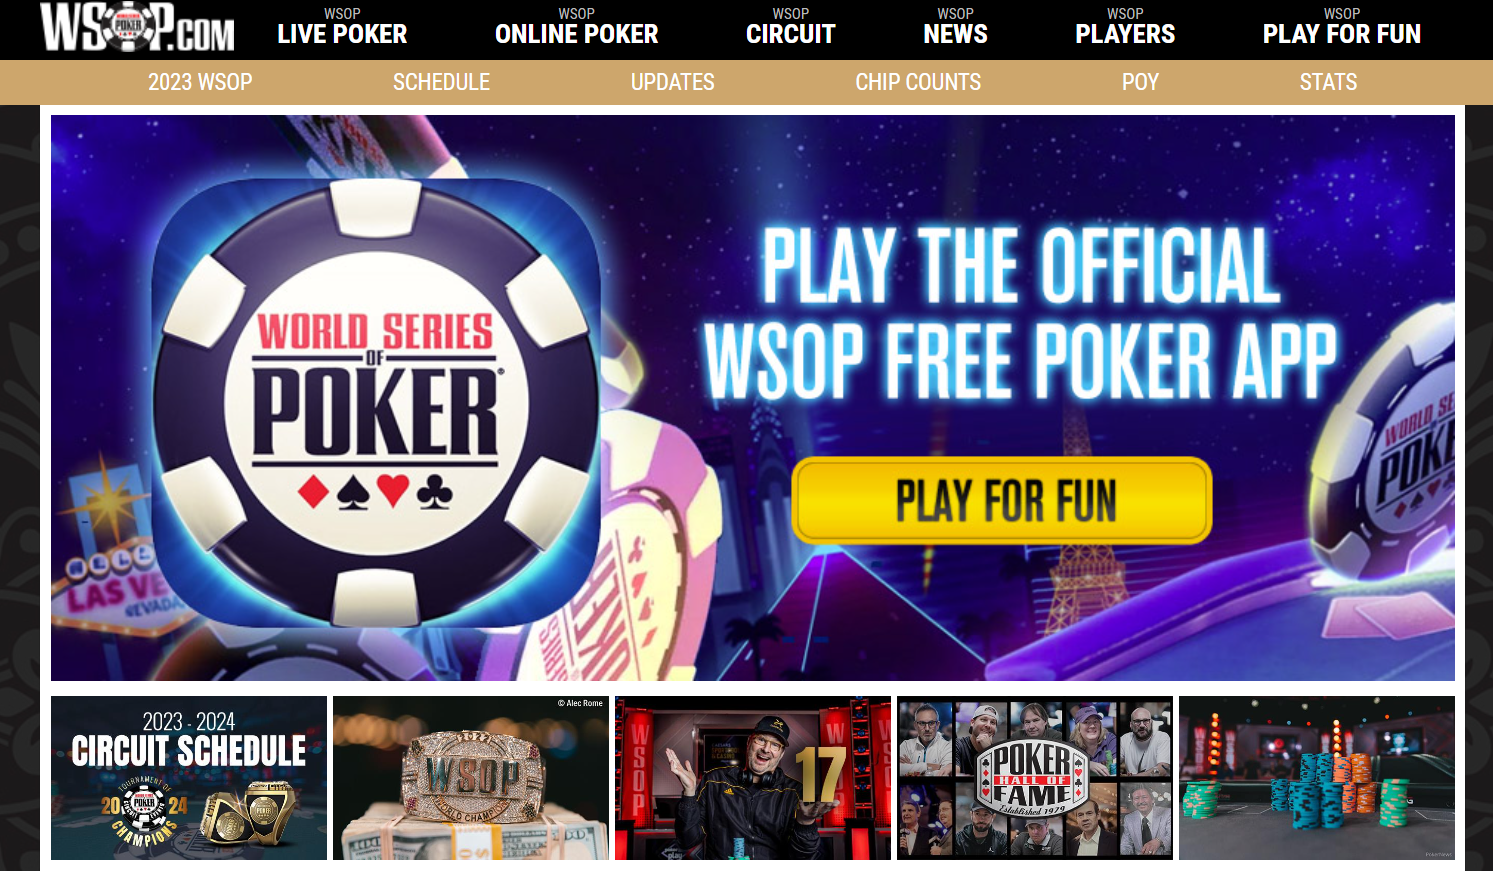 PLAY THE OFFICIAL WSOP FREE POKER APP